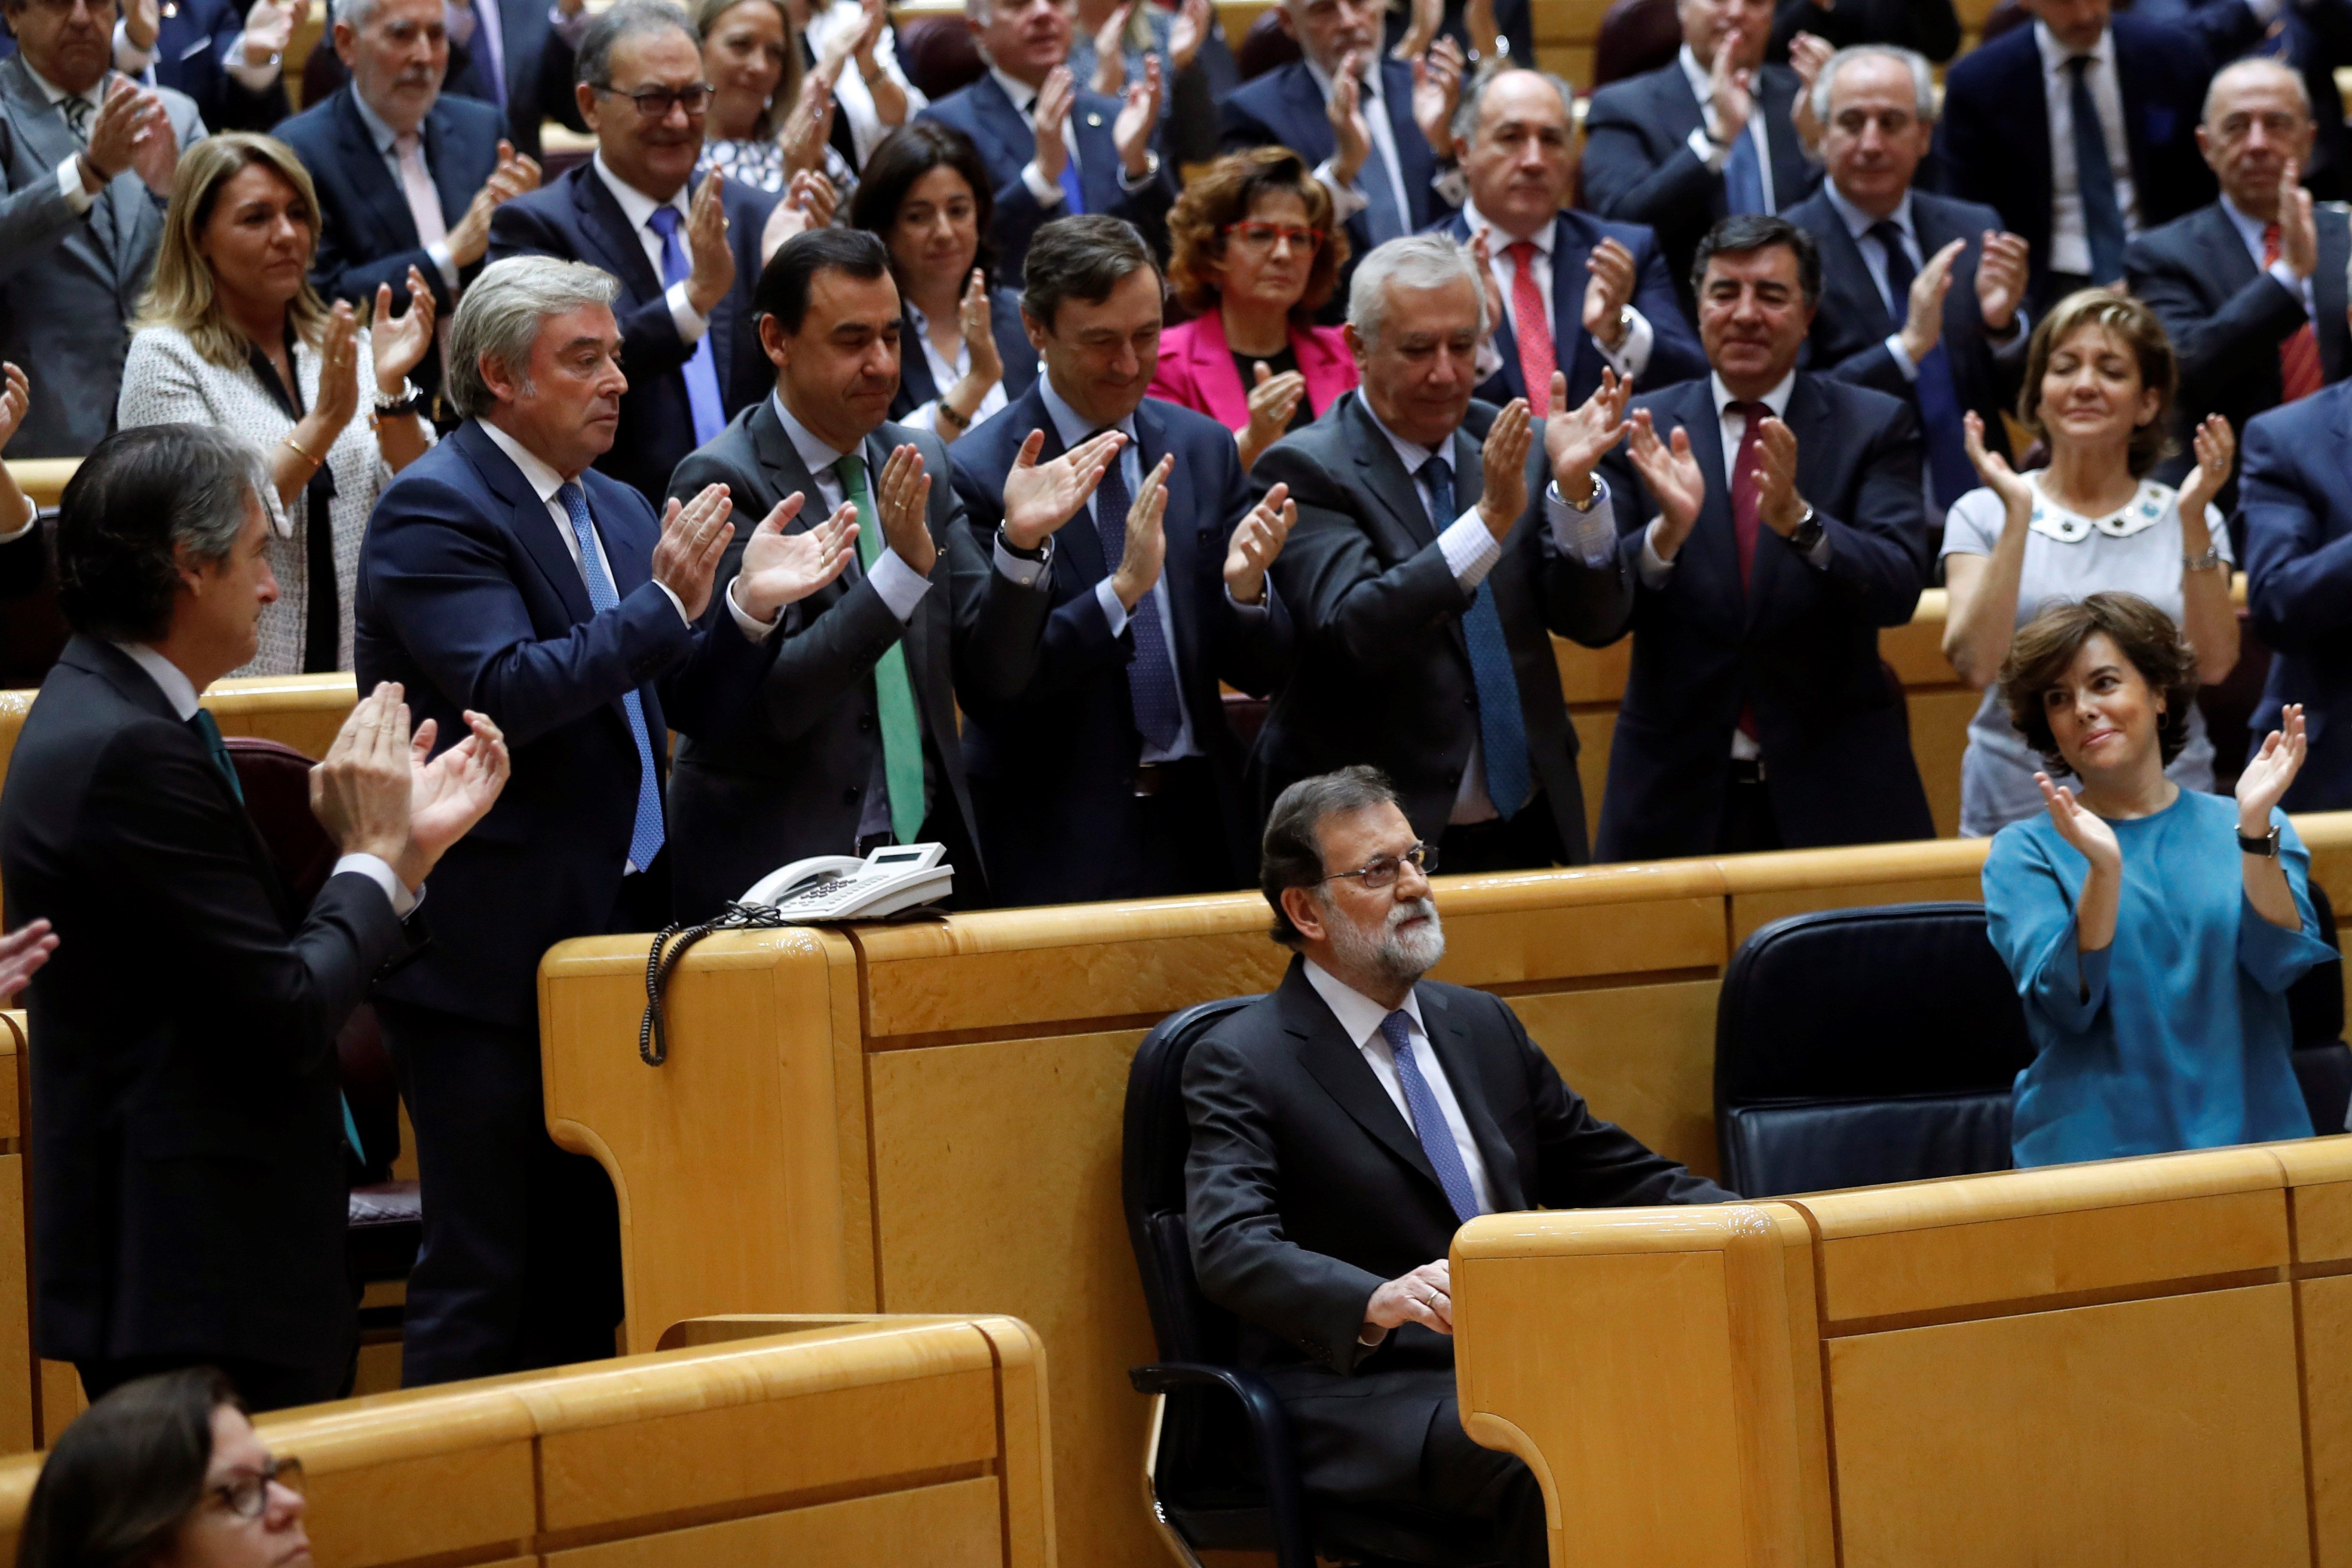 Rajoy: "Spain is winning against those who want to destroy it"